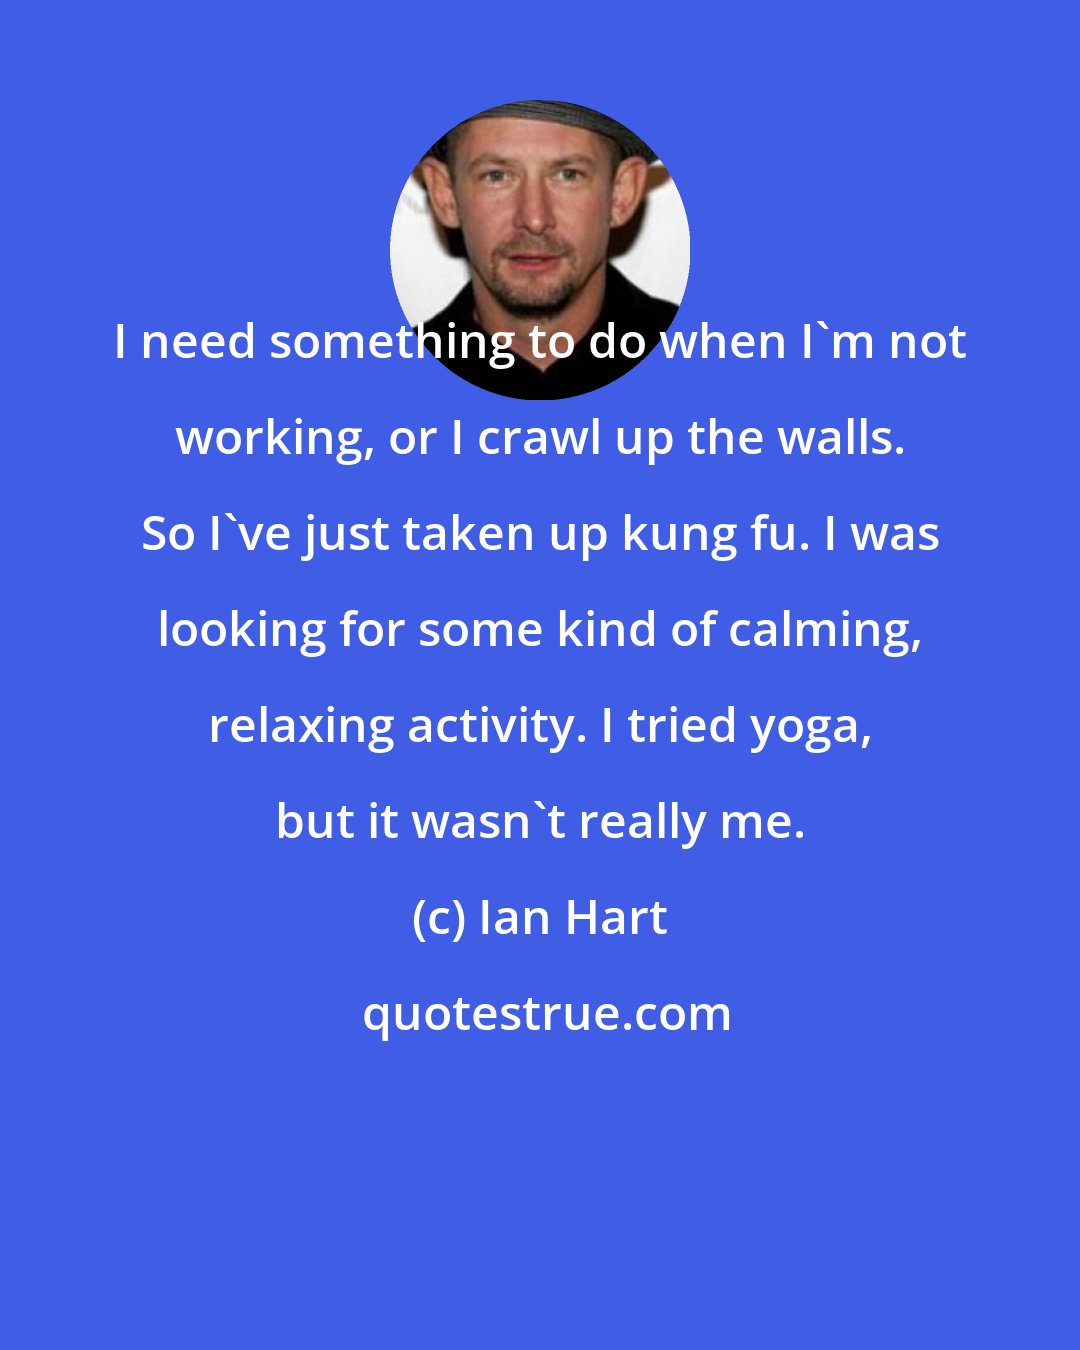 Ian Hart: I need something to do when I'm not working, or I crawl up the walls. So I've just taken up kung fu. I was looking for some kind of calming, relaxing activity. I tried yoga, but it wasn't really me.